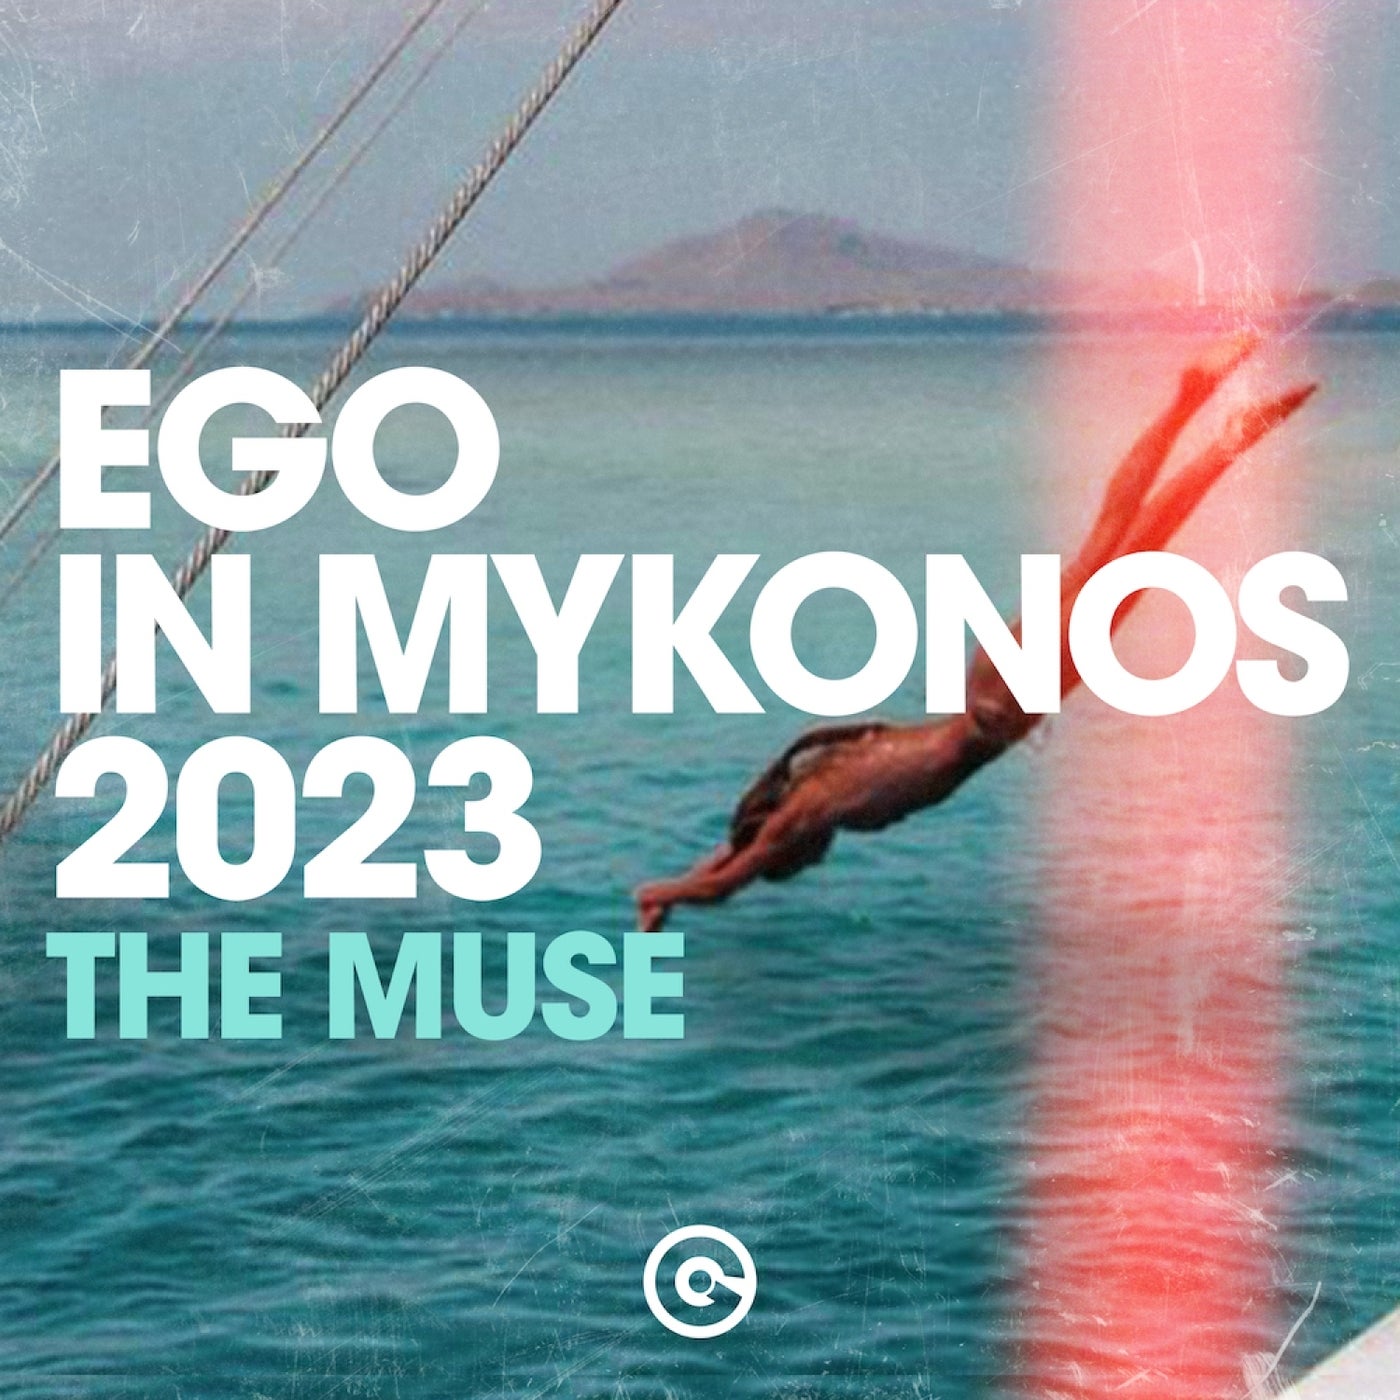 Ego in Mykonos 2023 (The Muse)